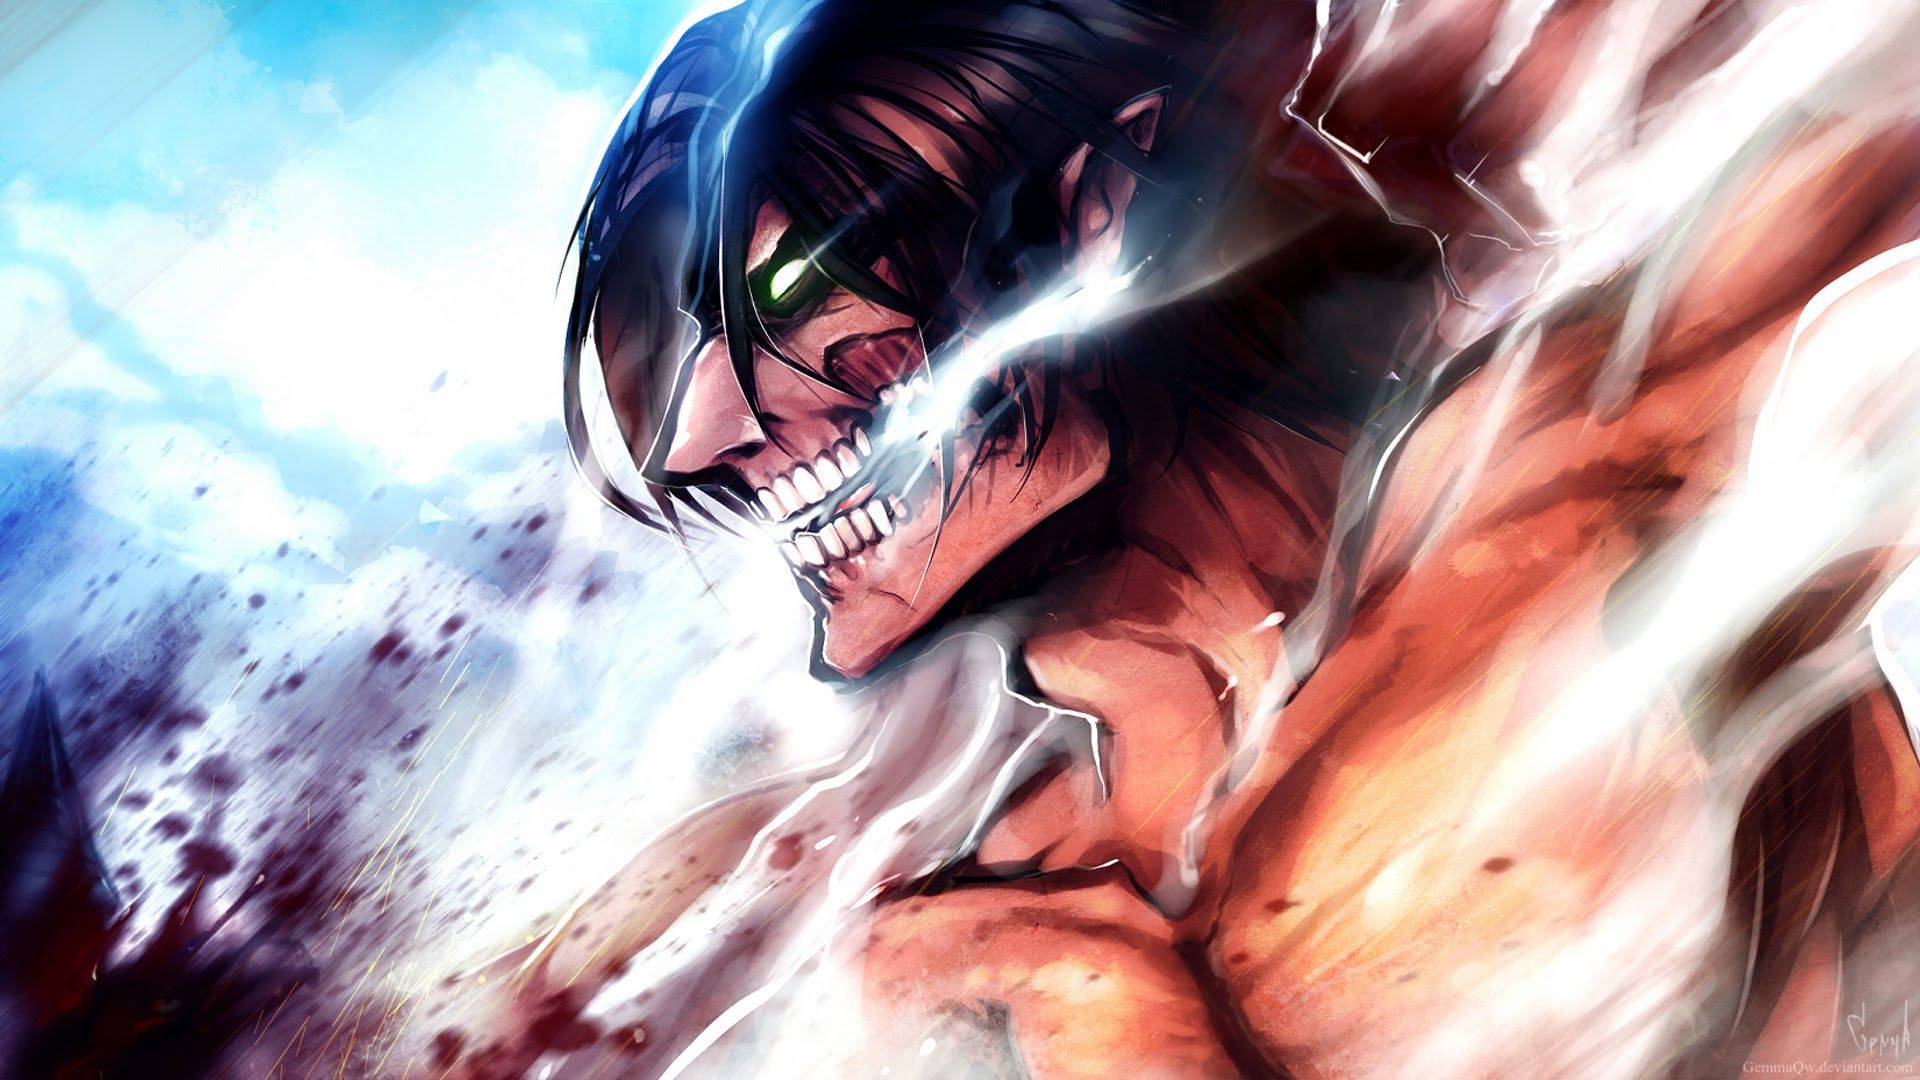 Wallpaper ID: 451297 / Anime Attack On Titan Phone Wallpaper, Eren Yeager,  720x1280 free download